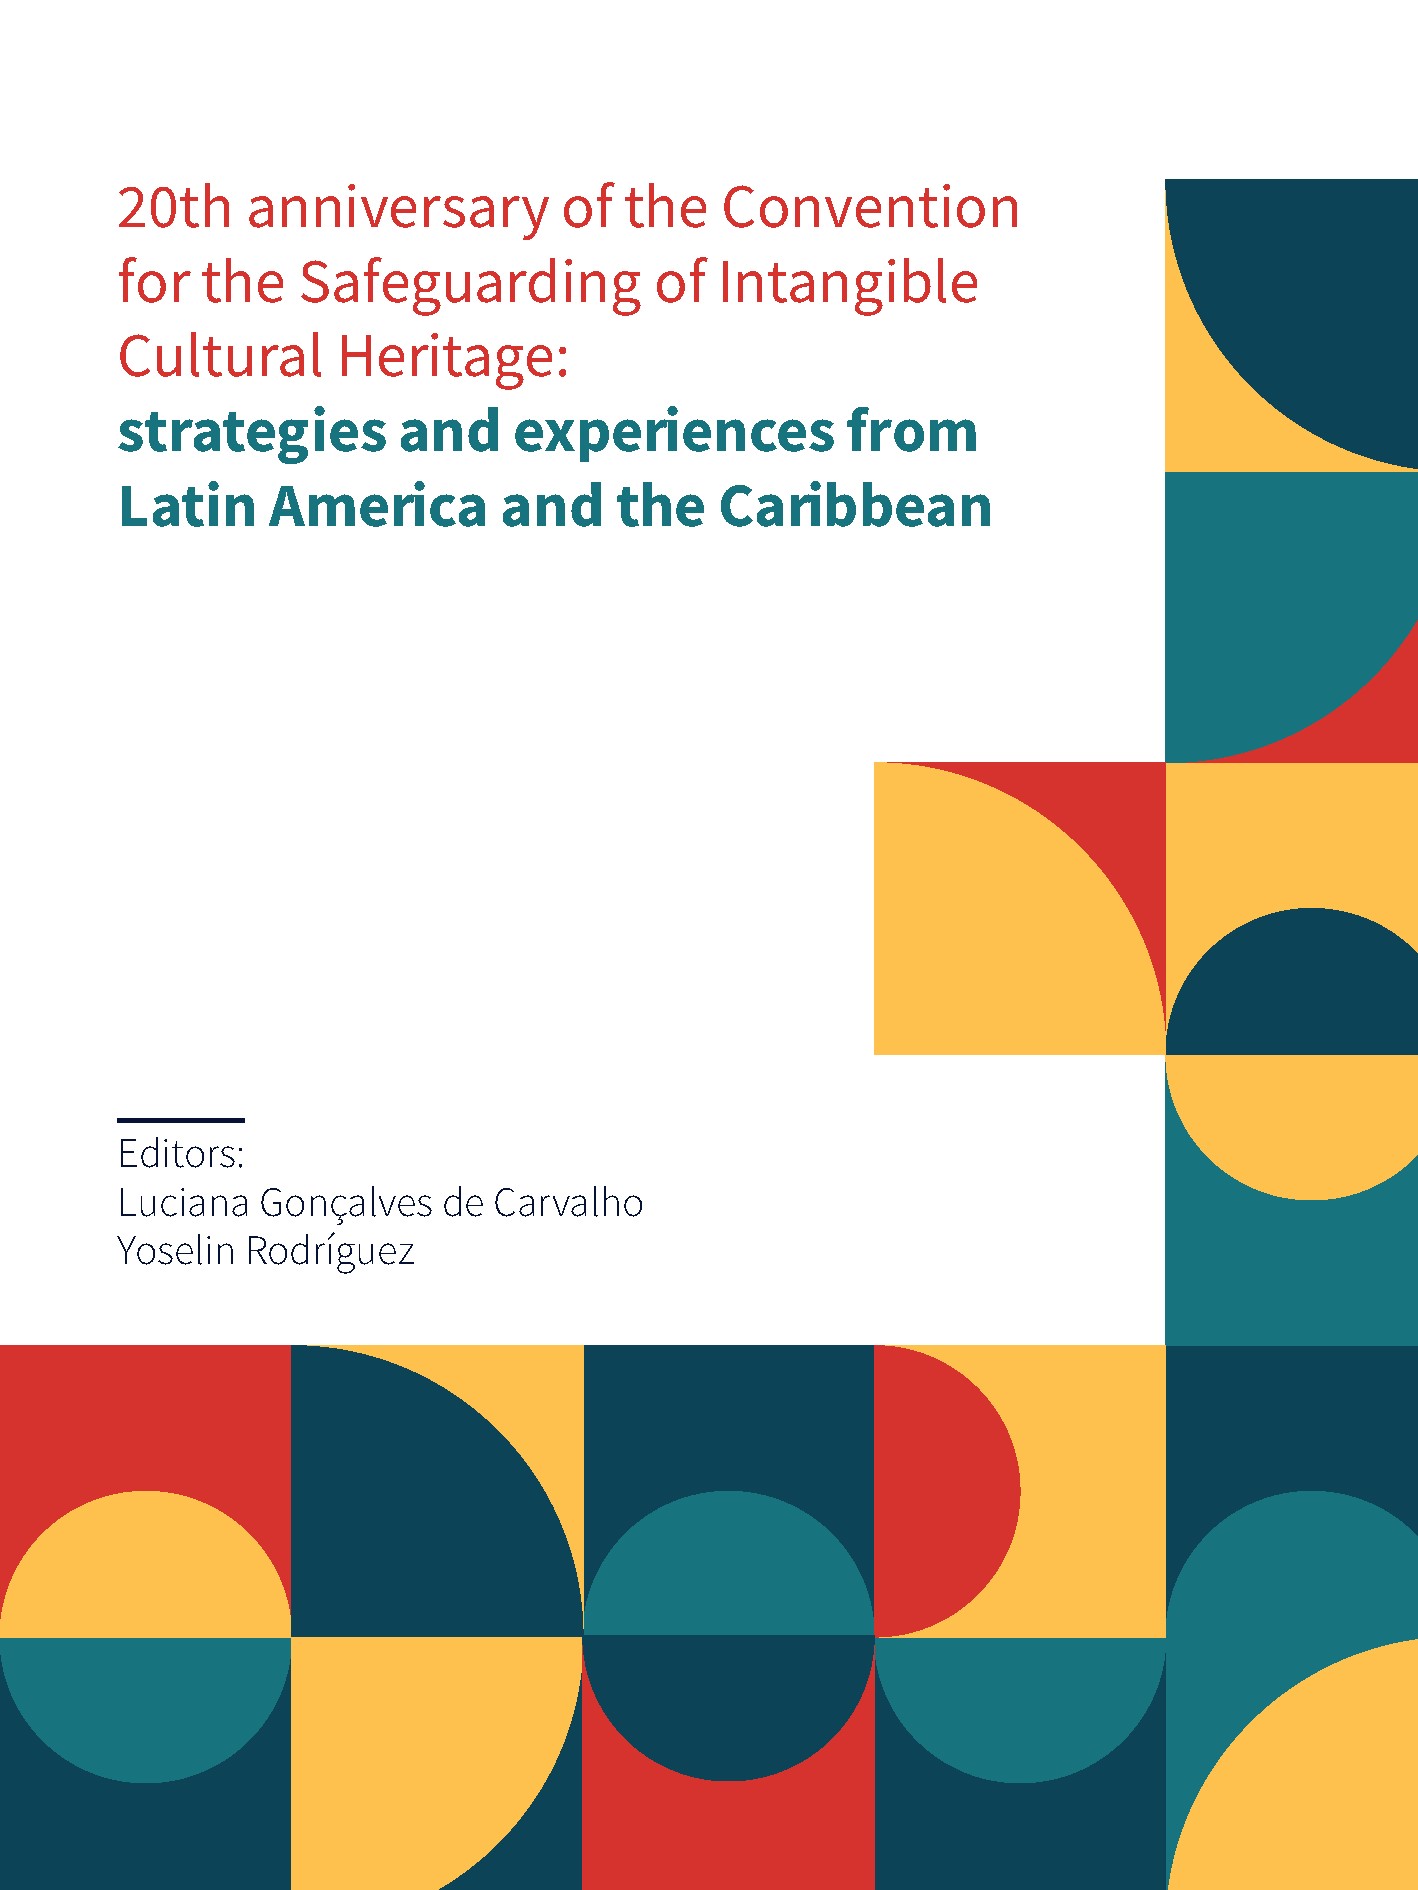 Publication ‘20th anniversary of the Convention for the Safeguarding of Intangible Cultural Heritage: strategies and experiences from Latin America and the Caribbean’ 